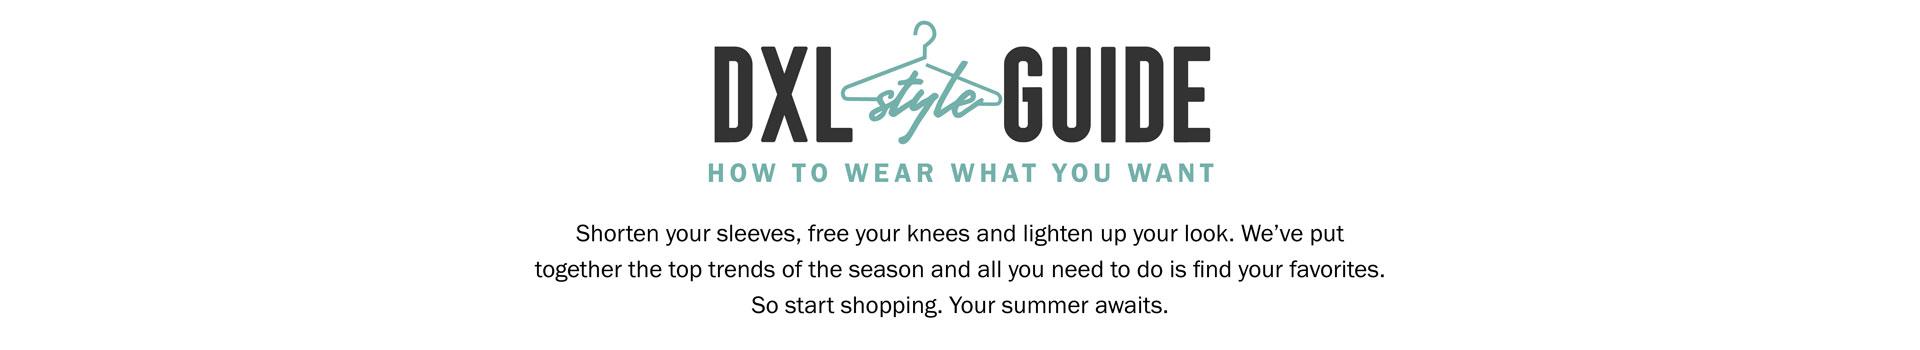 DXL STYLE GUIDE | HOW TO WEAR WHAT YOU WANT | Shorten your sleeves, free your knees and lighten up your look. We’ve put together the top trends of the season and all you need to do is find your favorites. So start shopping. Your summer awaits.